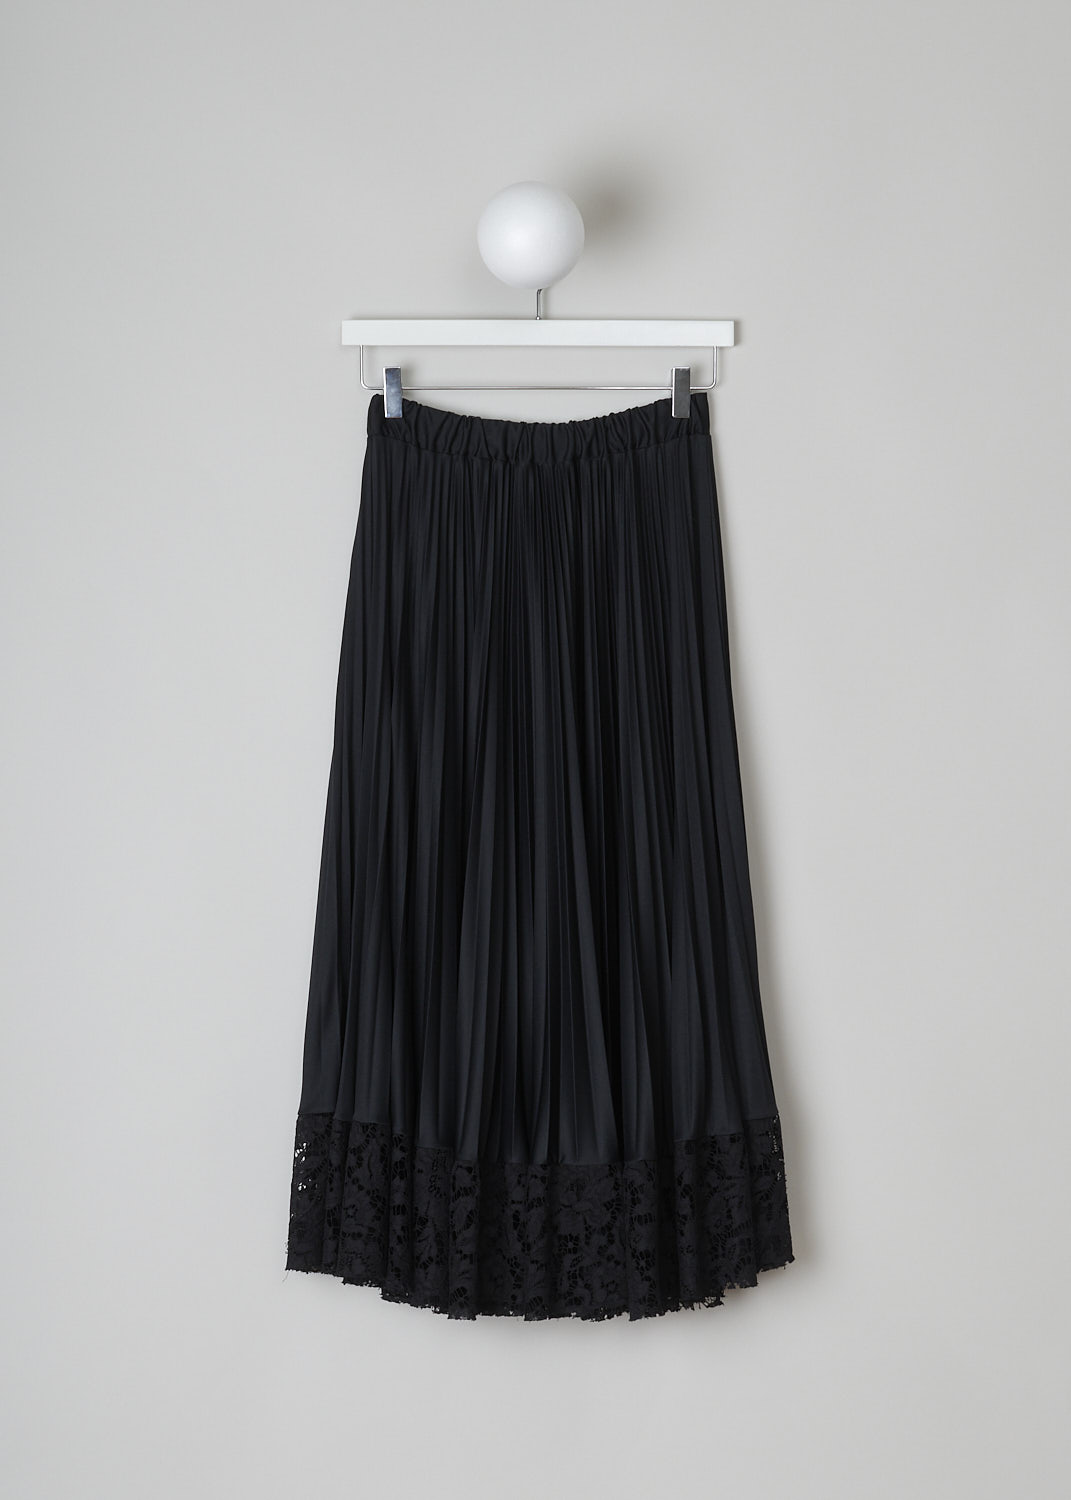 VALENTINO, BLACK PLEATED SKIRT WITH LACE TRIM, TB3MD01H575_0N0, Black, Back, This black pleated skirt has a partly elasticated waistband with the brand's logo on it to one side. The skirt has a below-the-knee length. The straight hemline has a broad black lace trim.   
